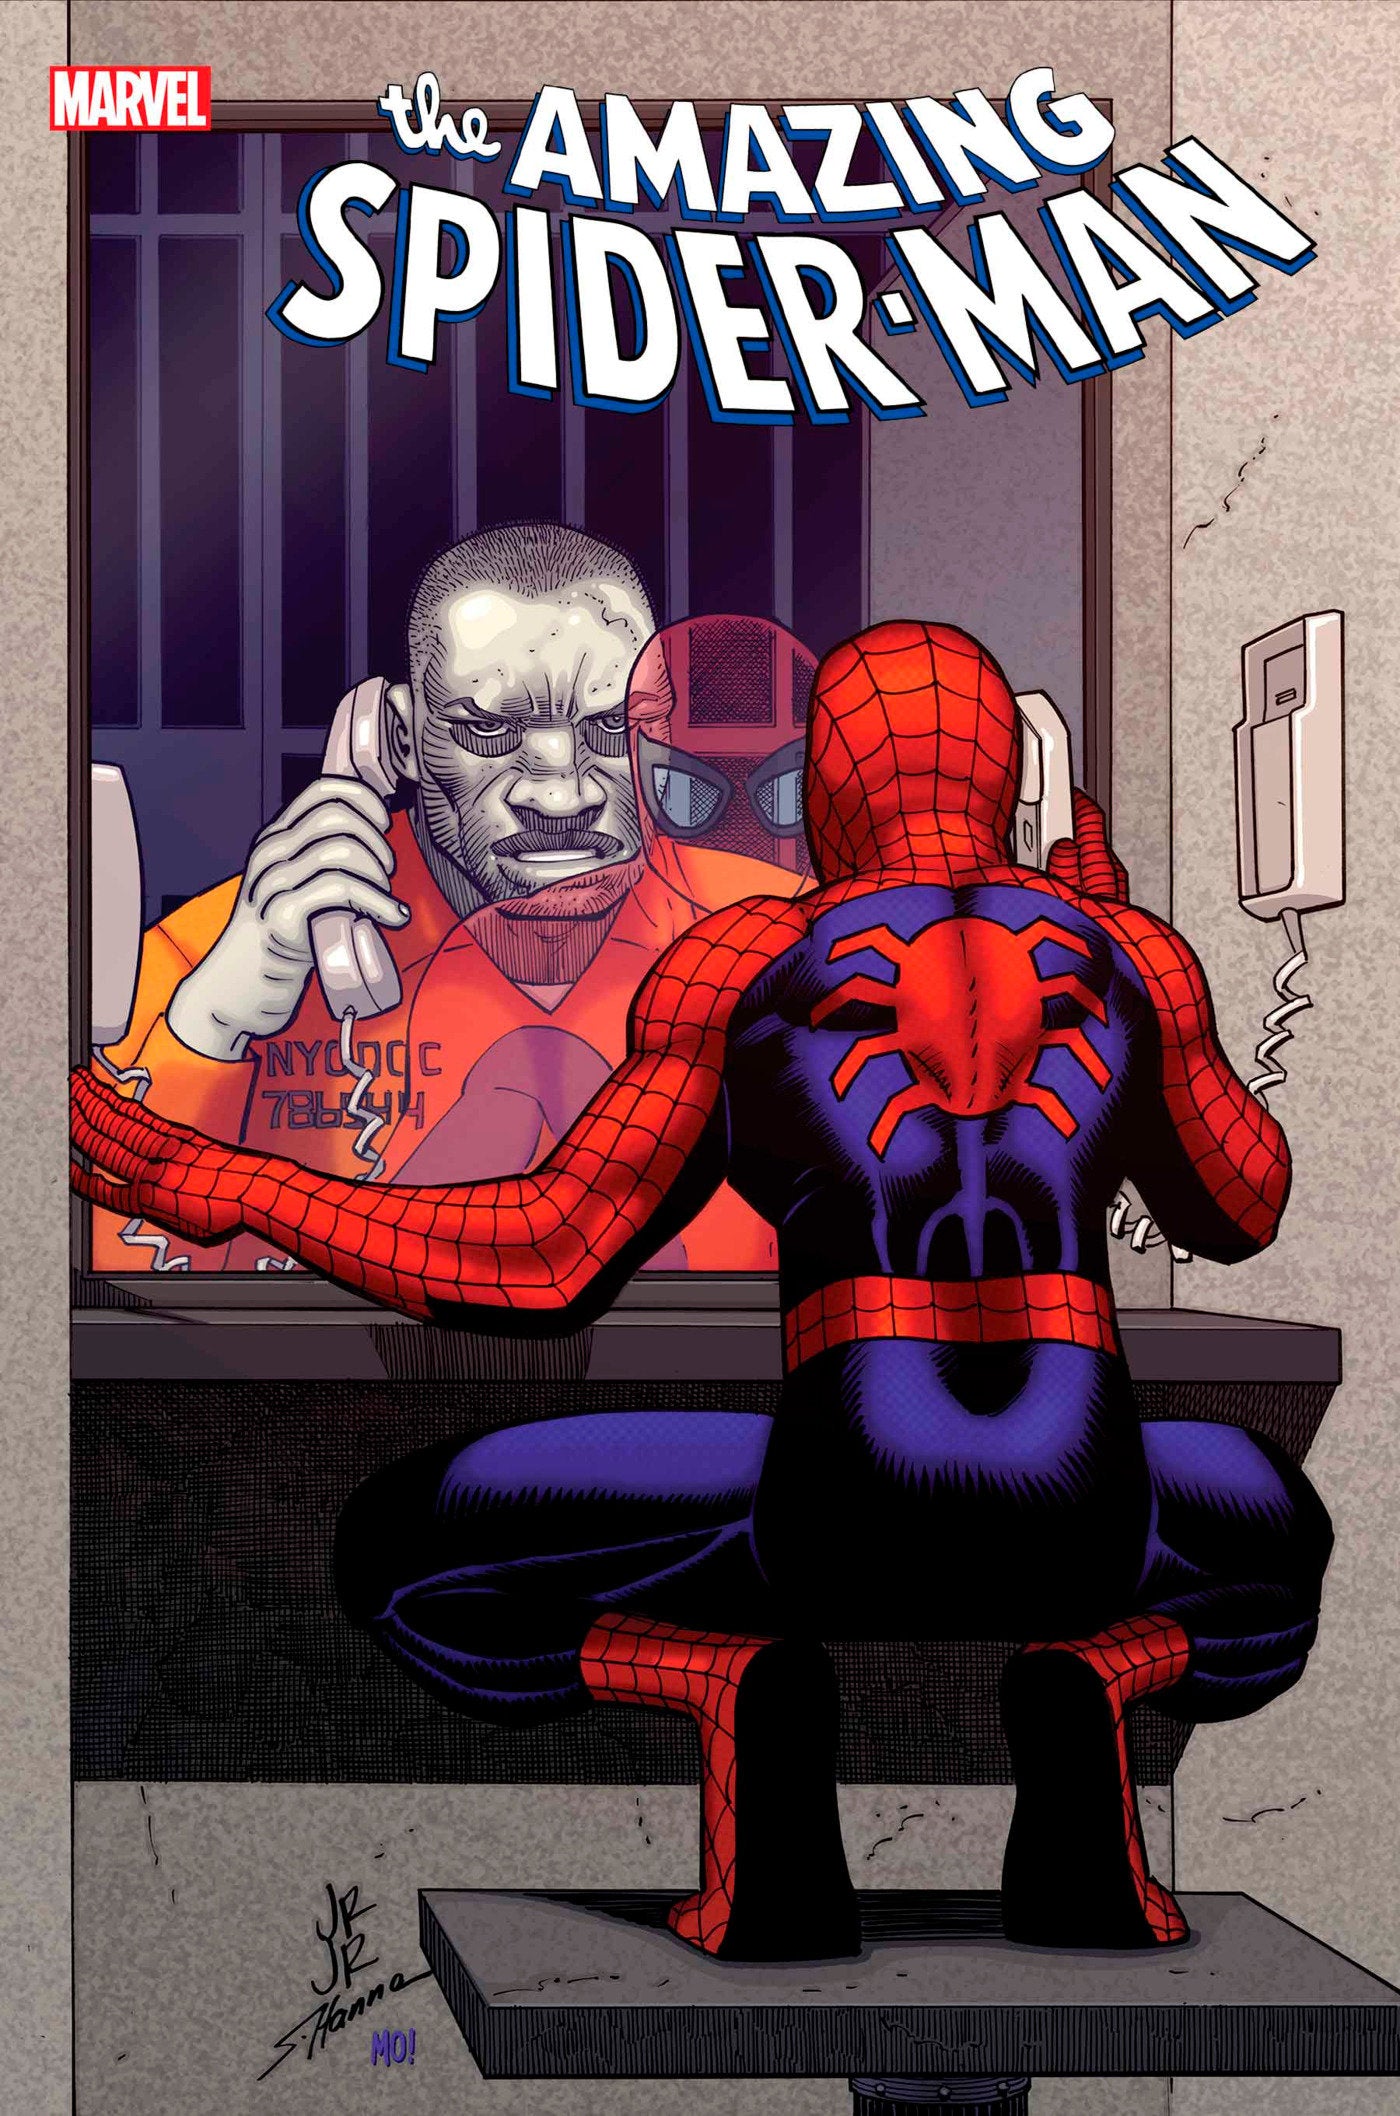 AMAZING SPIDER-MAN #57 - End Of The Earth Comics